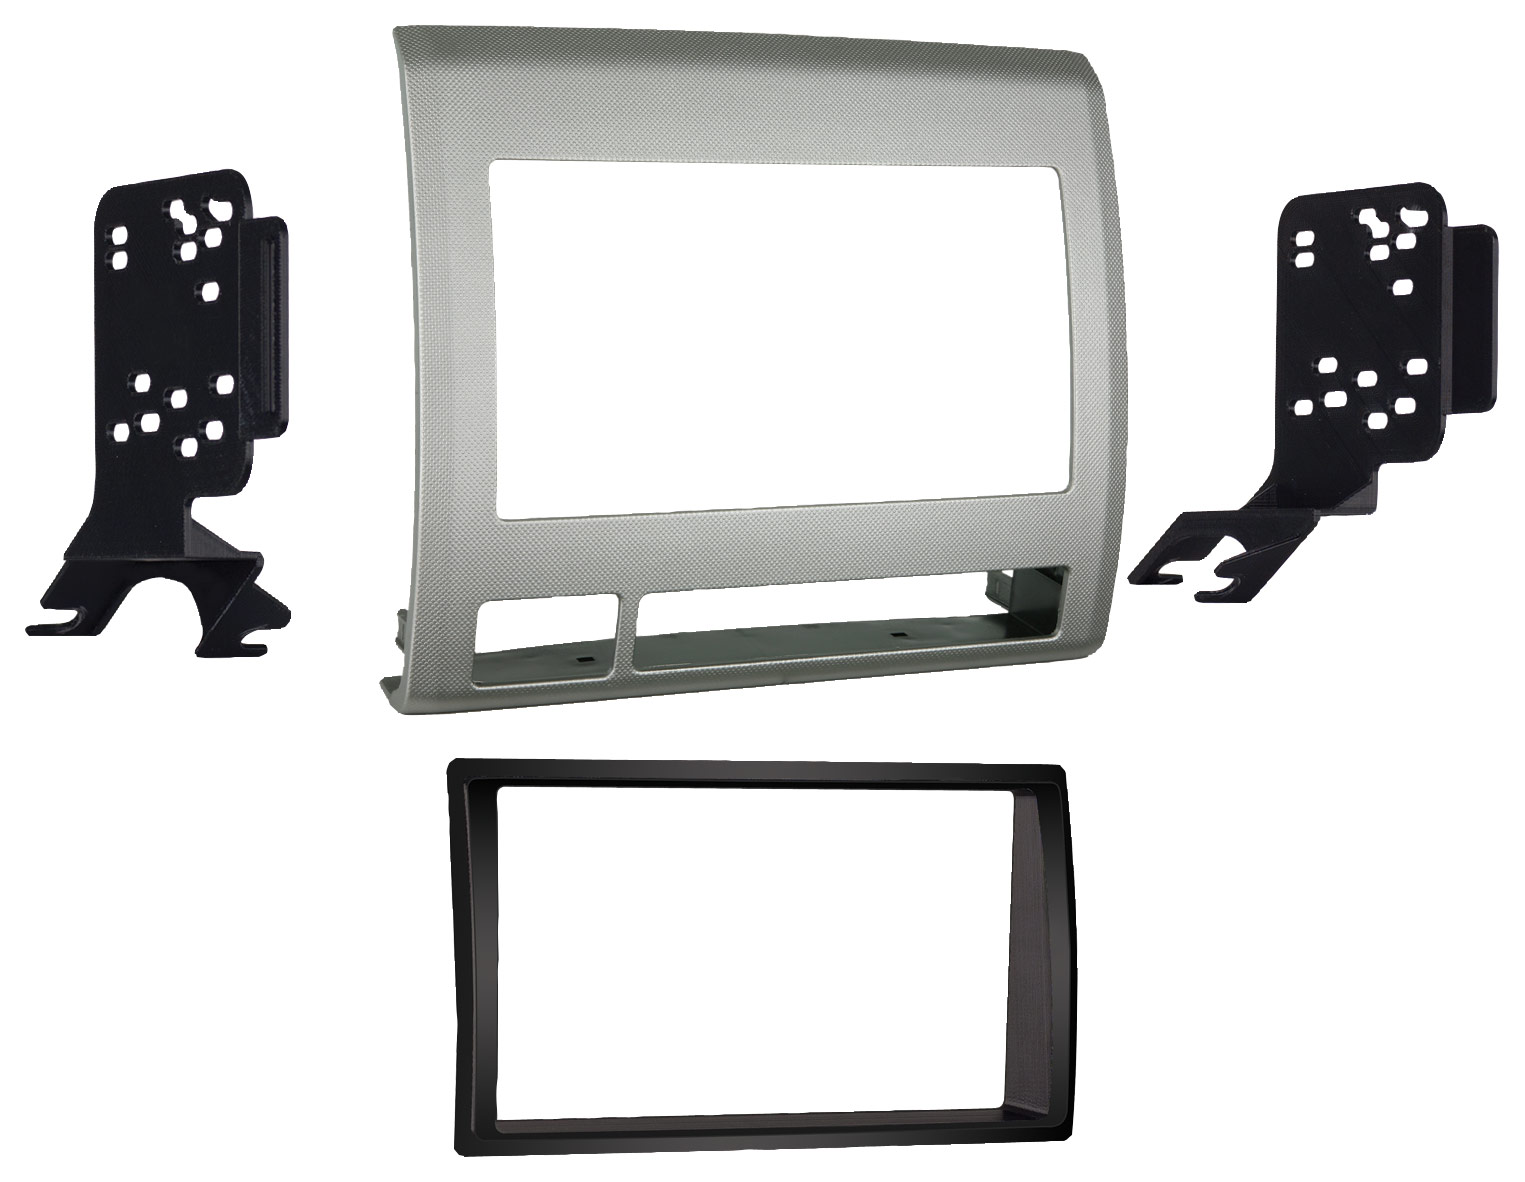 Metra - Installation Kit for Most 2005-2011 Toyota Tacoma Vehicles - Gray was $49.99 now $37.49 (25.0% off)